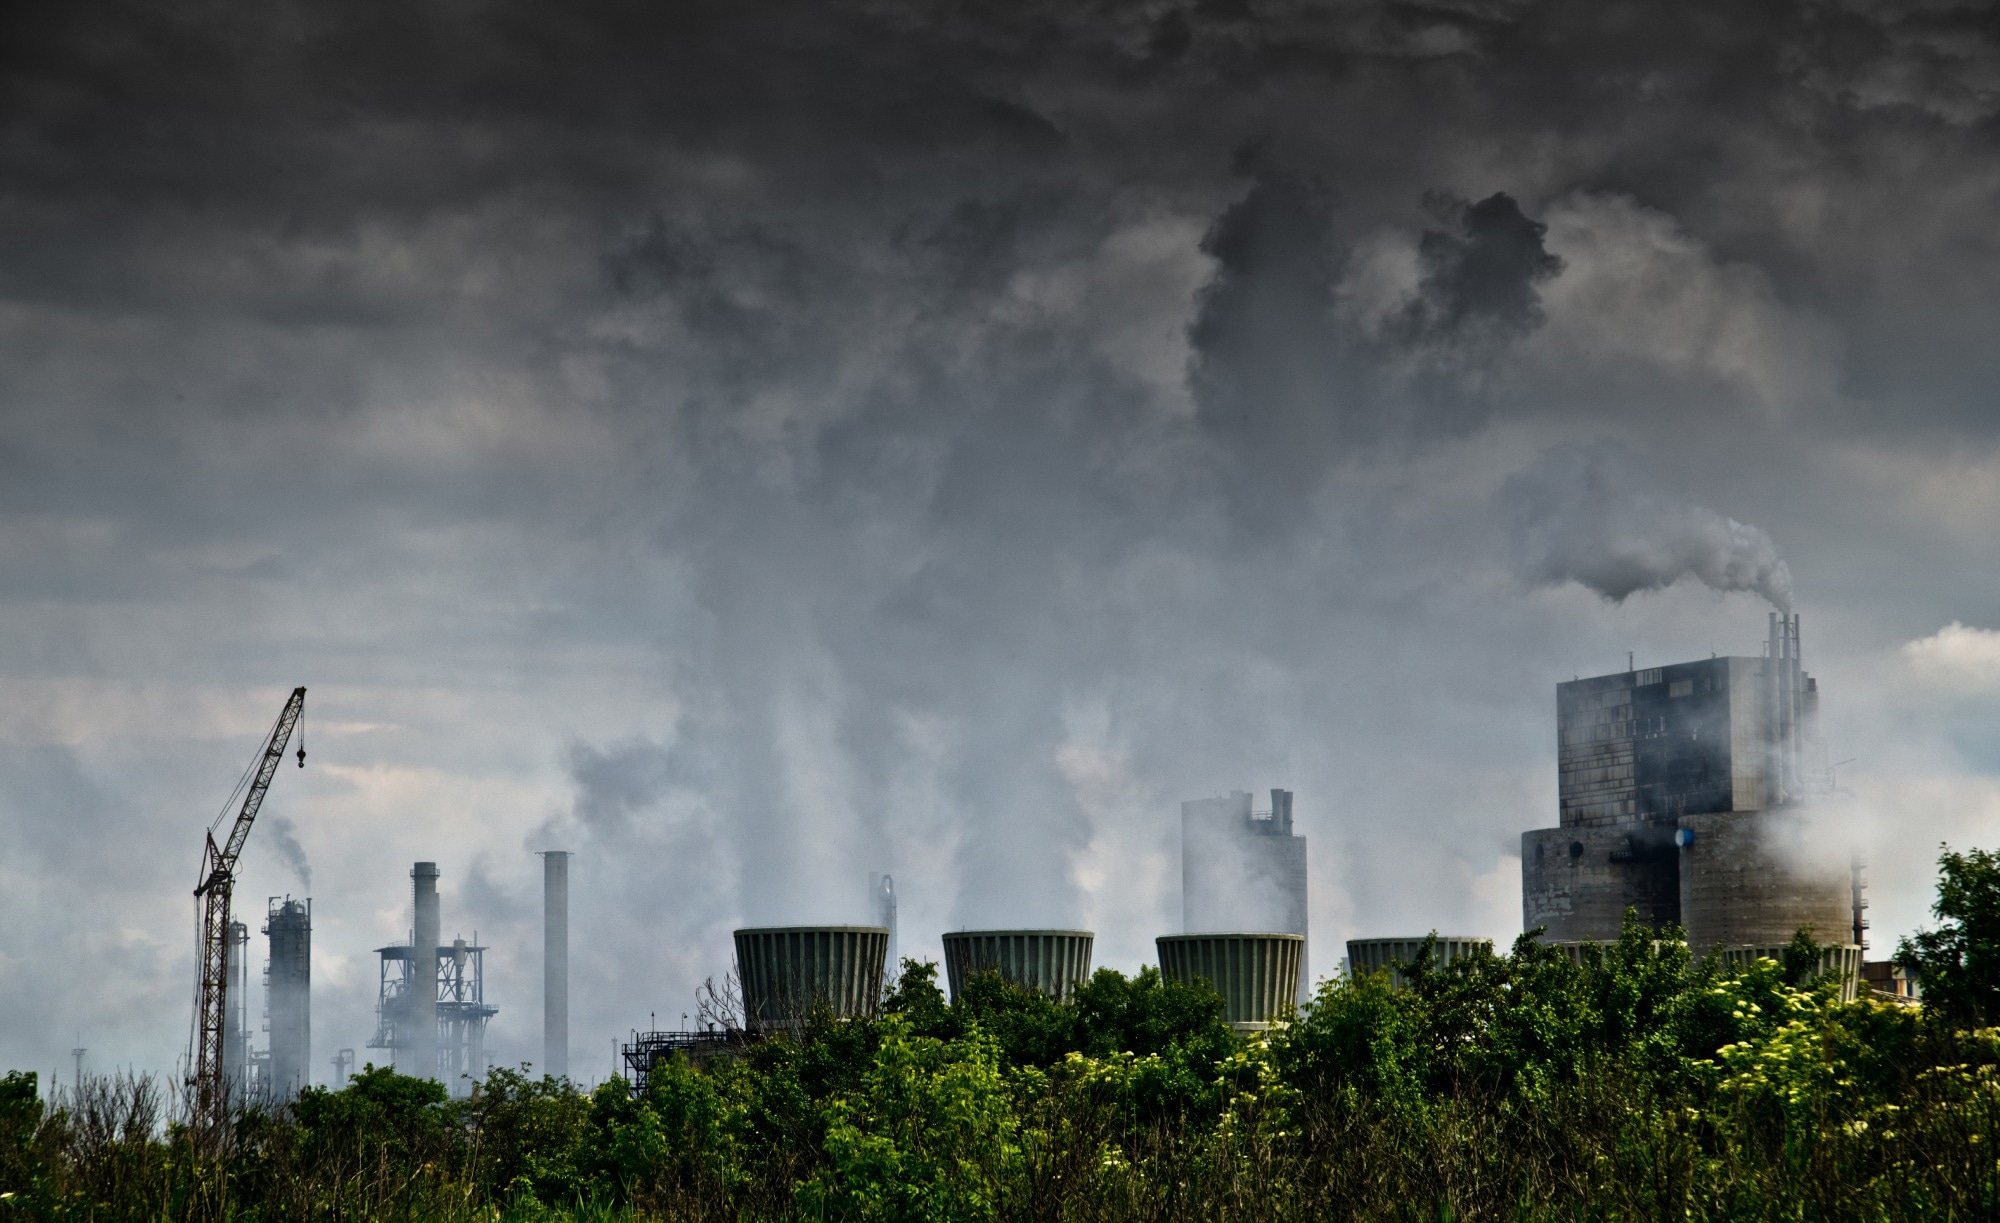 Study: Long-term air pollution exposure and markers of cardiometabolic health in the National Longitudinal Study of Adolescent to Adult Health (Add Health) Study. Image Credit: BalazsVekony/Shutterstock.com